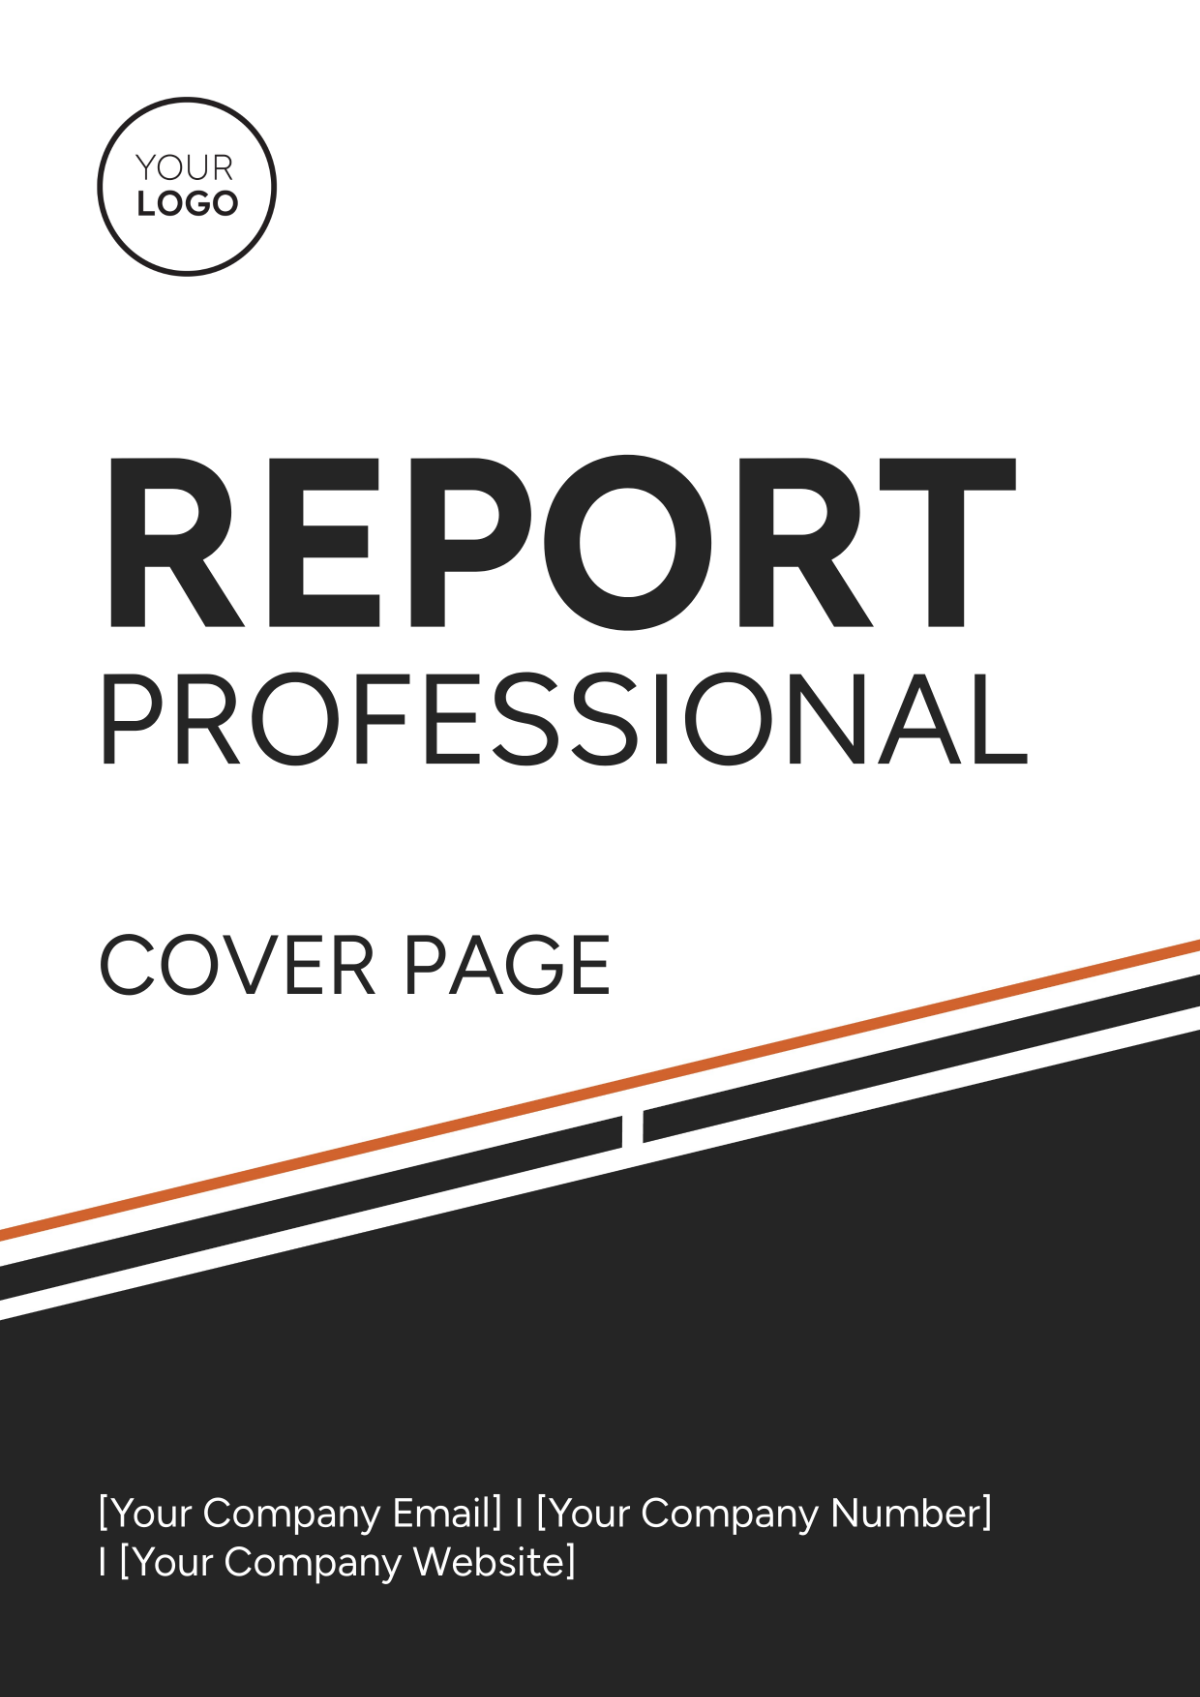 Report Professional Cover Page